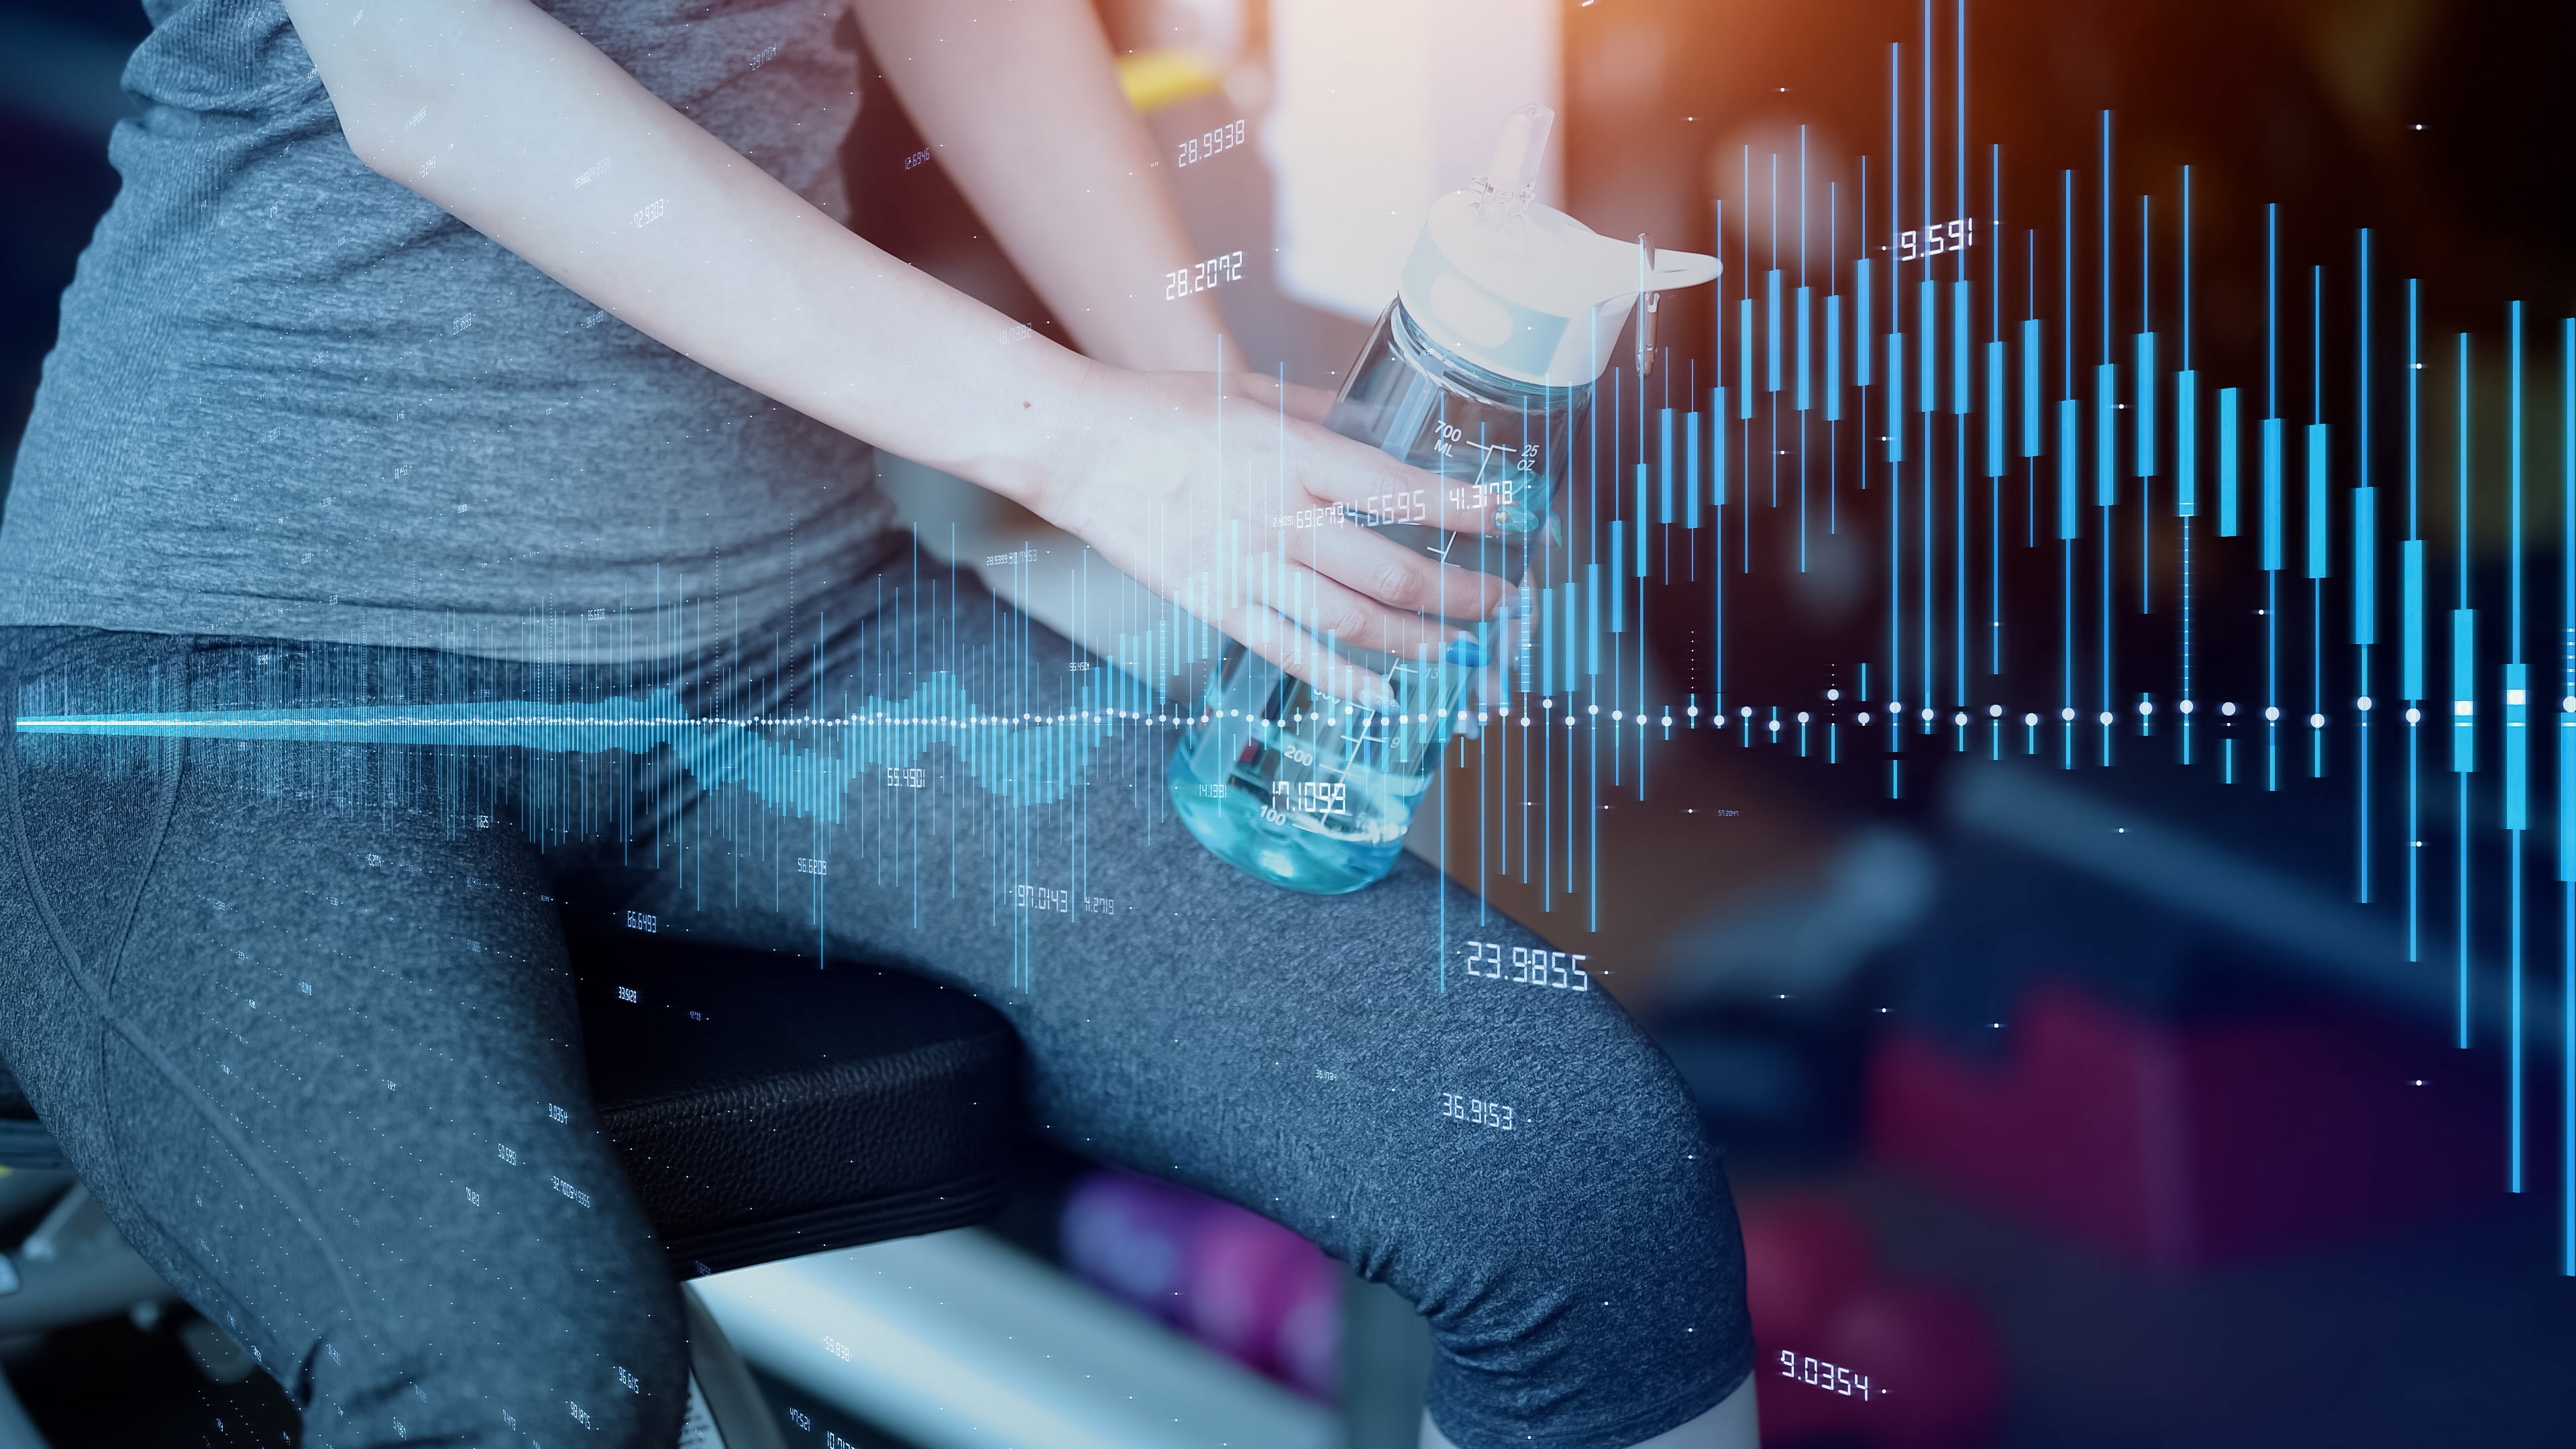 A photo of a woman sat on an exercise bench with a water bottle in her hand. Biorhythm graphics are overlaid for visual representation.